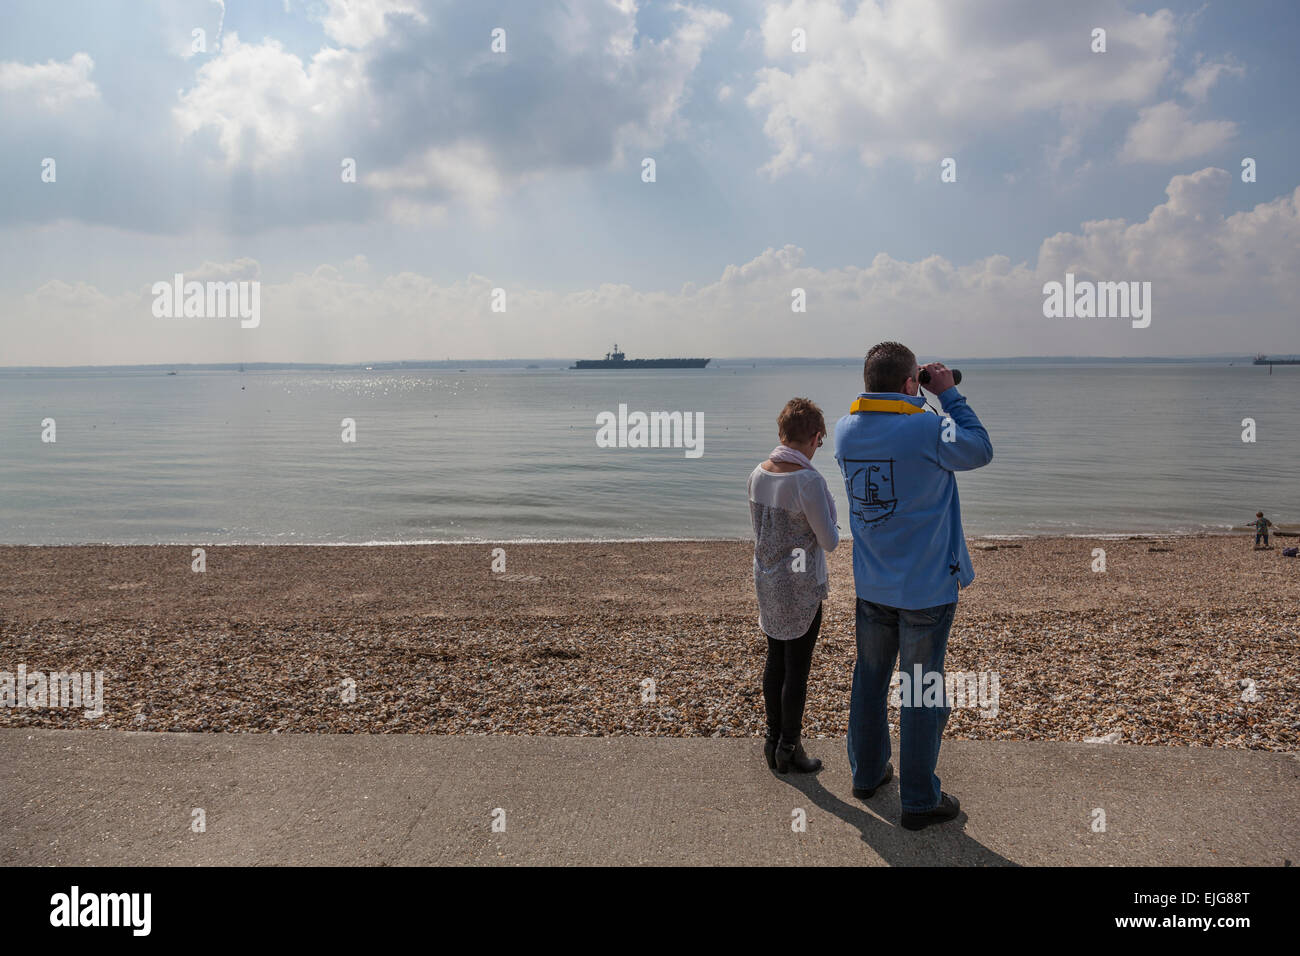 Stokes Bay, Solent, UK. 25th March, 2015. A couple survey the Solent with binoculars as the Nimitz class aircraft carrier USS Theodore Roosevelt lies at anchor in the distance, 25th March 2015. Credit:  Anthony Hatley/Alamy Live News Stock Photo